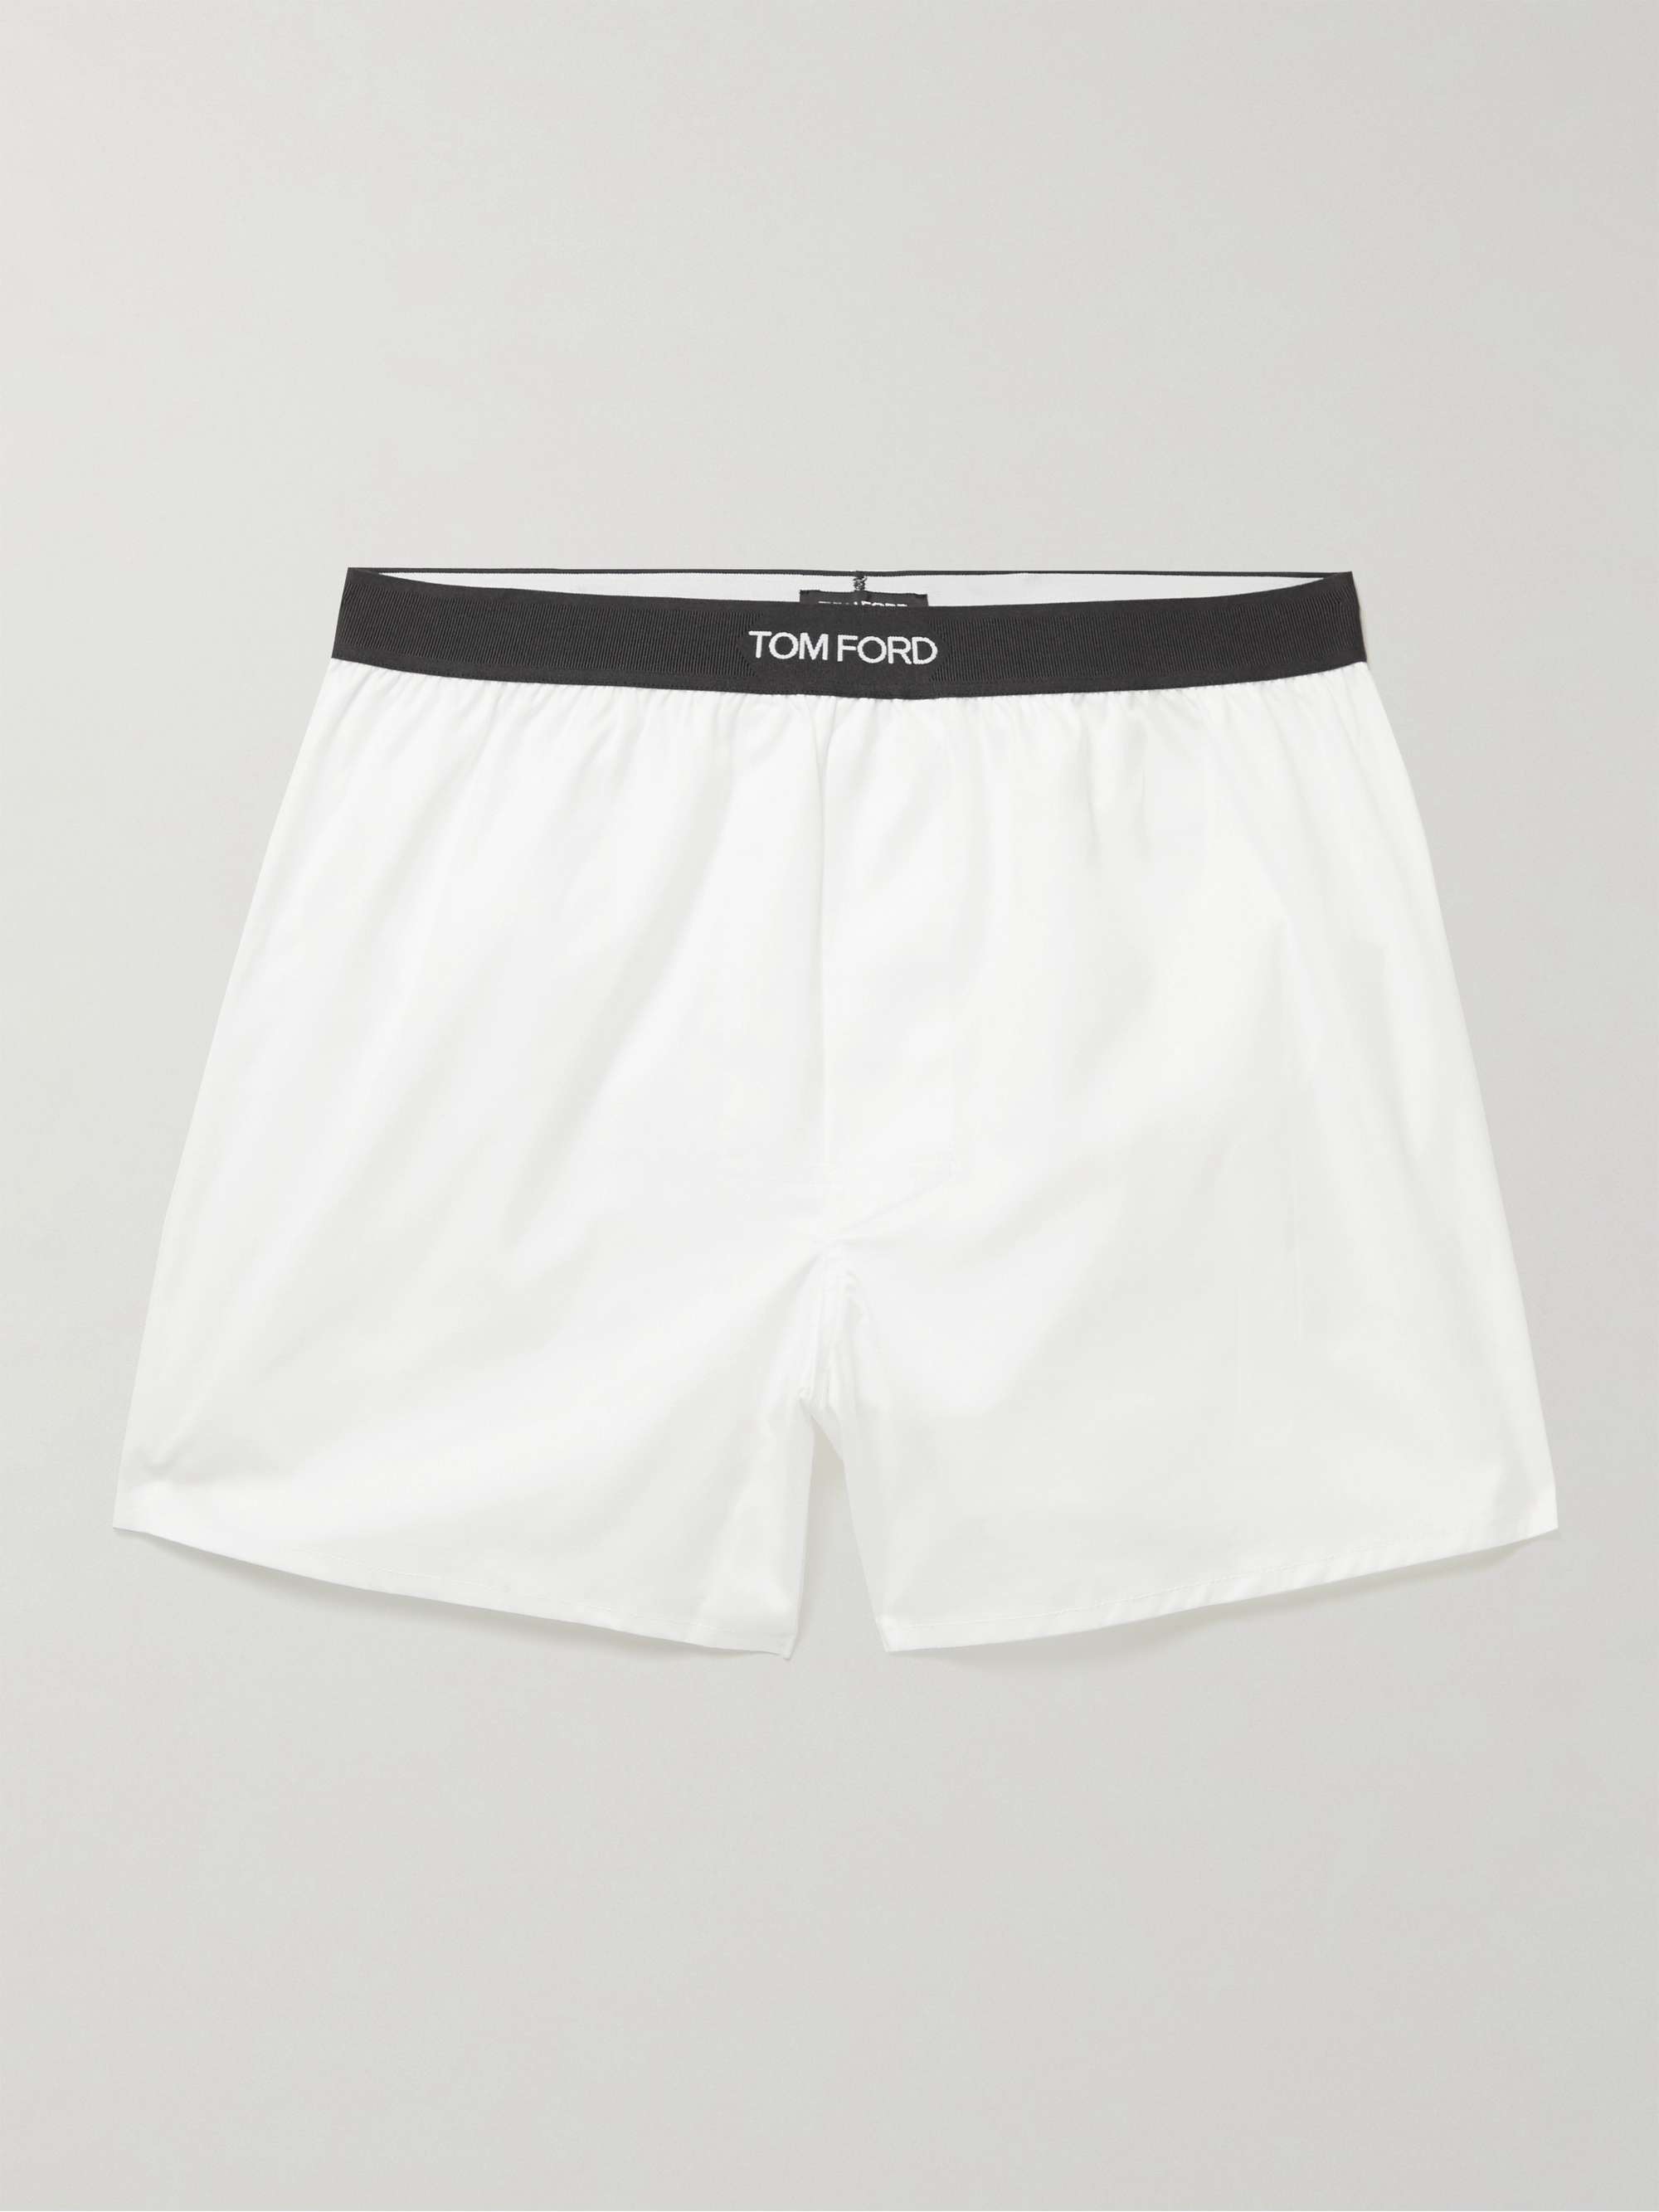 TOM FORD Cotton Boxer Shorts